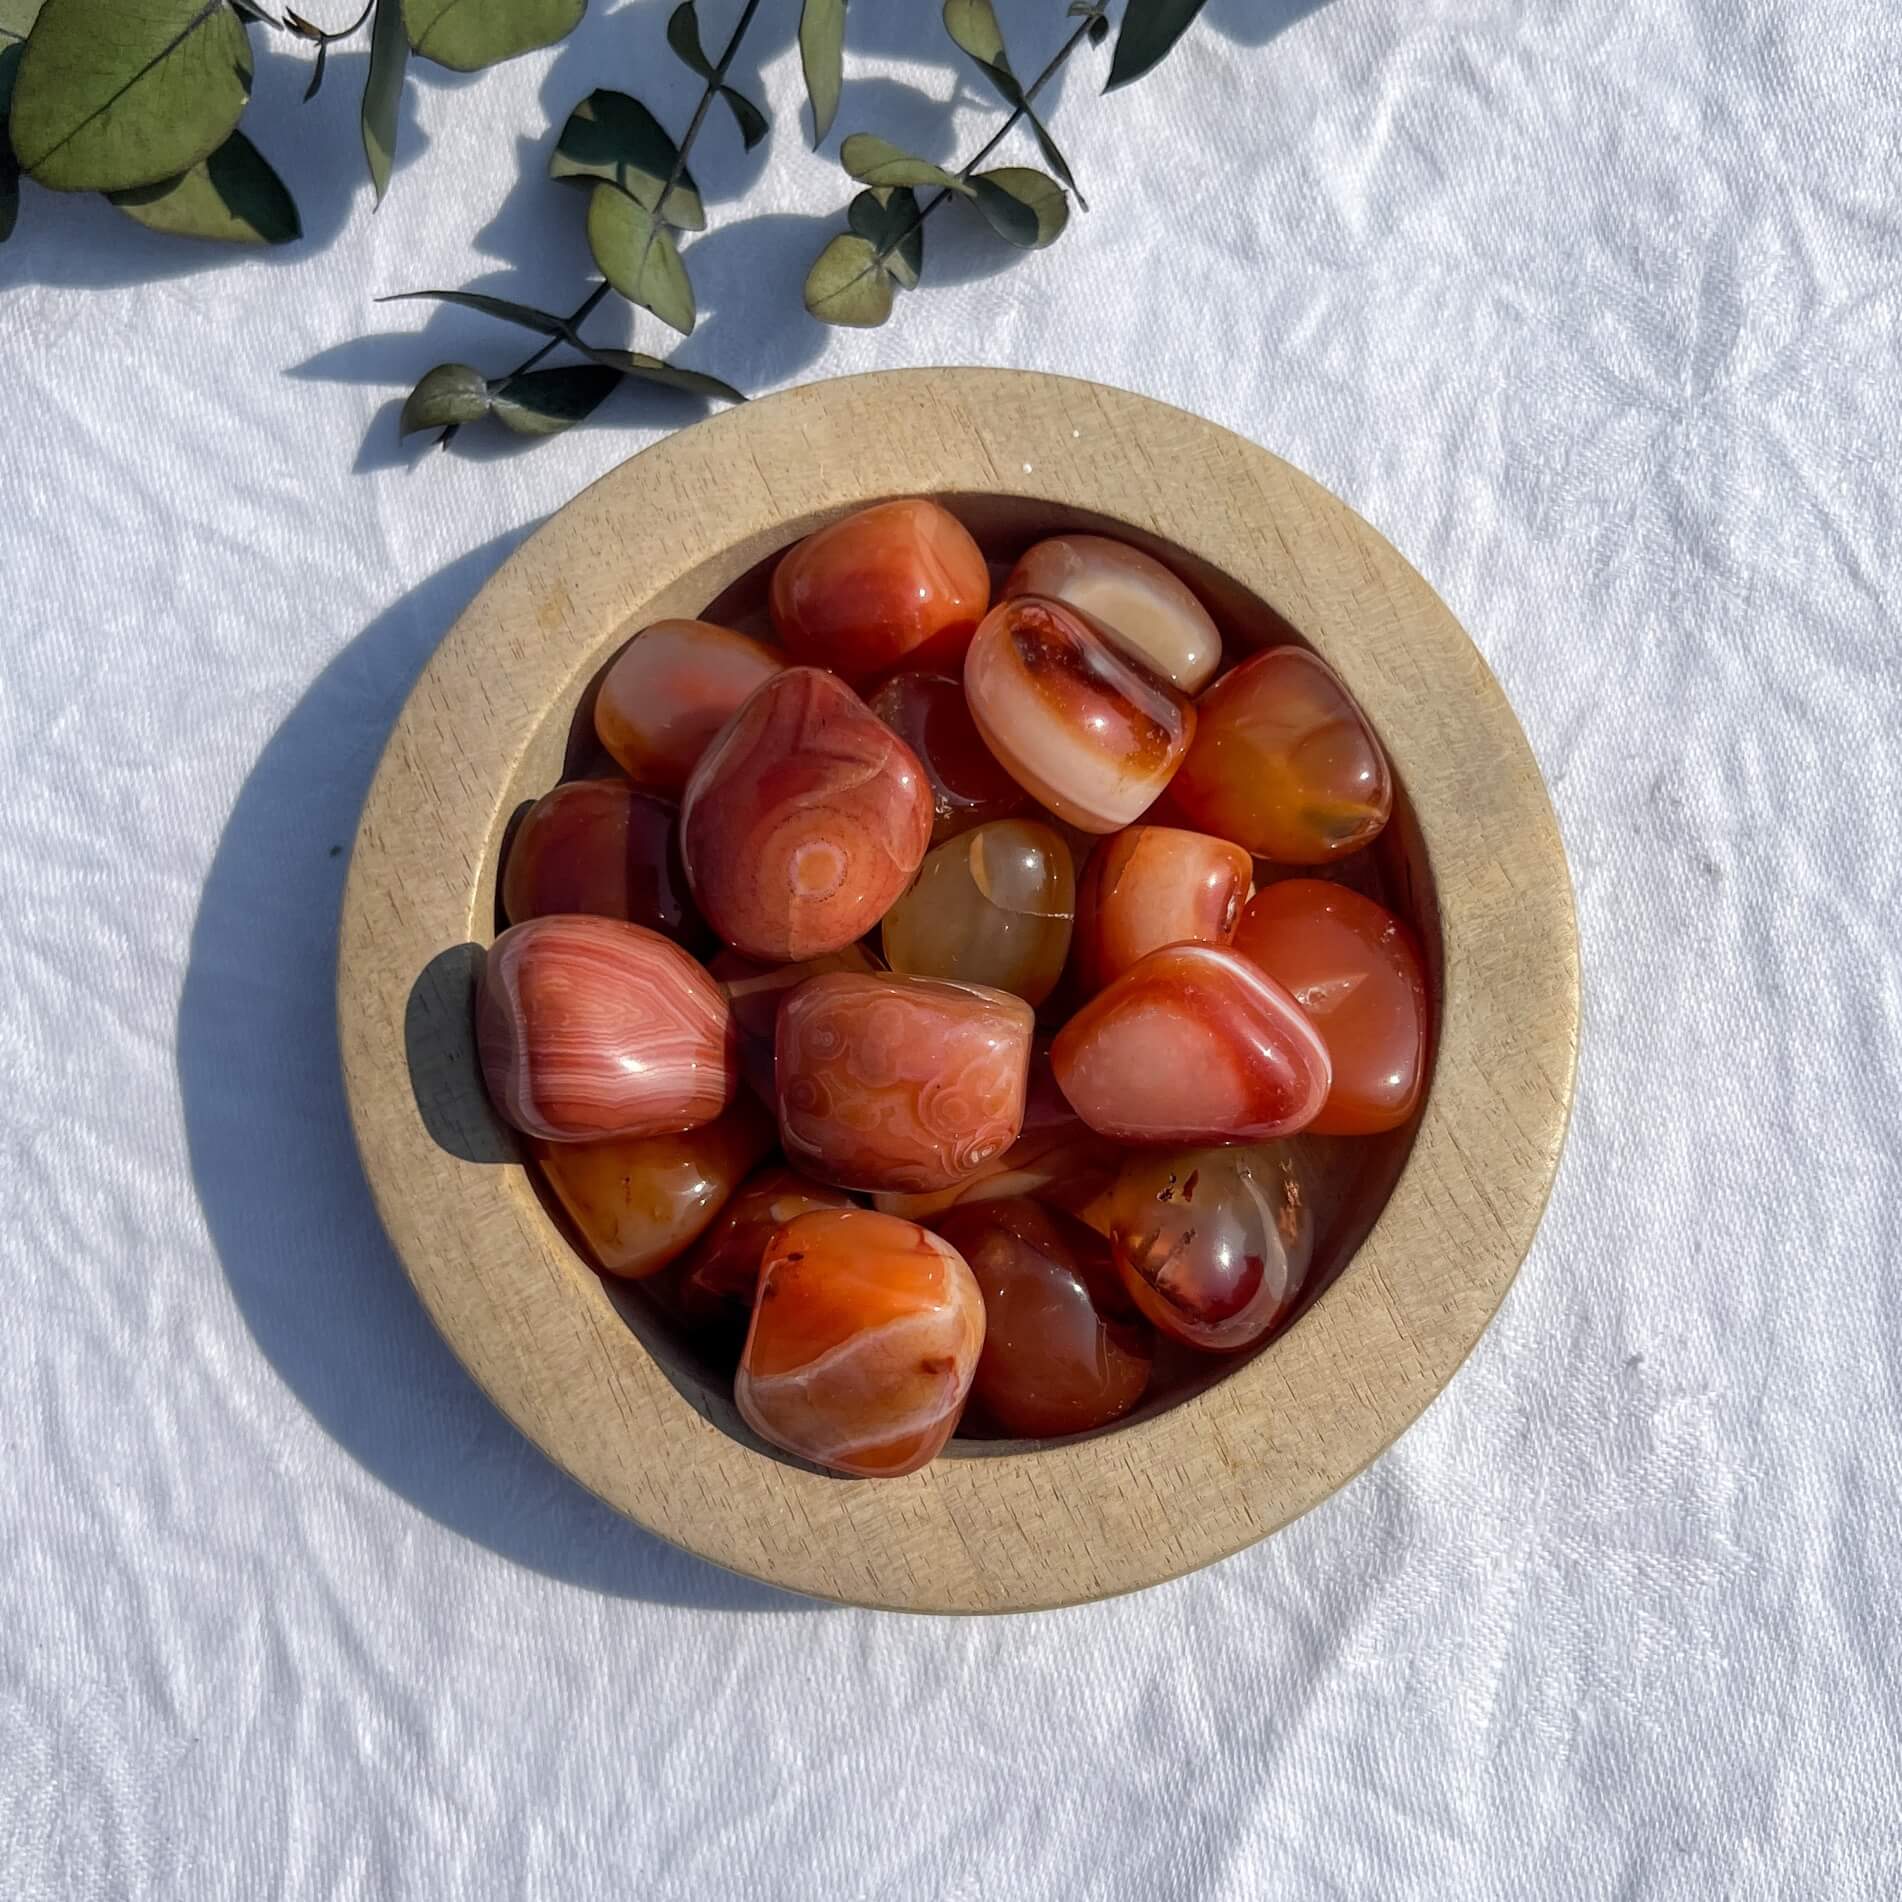 An aerial view of a wooden dish filled with  bright red, white and orange patterned extra large carnelian crystal tumblestones